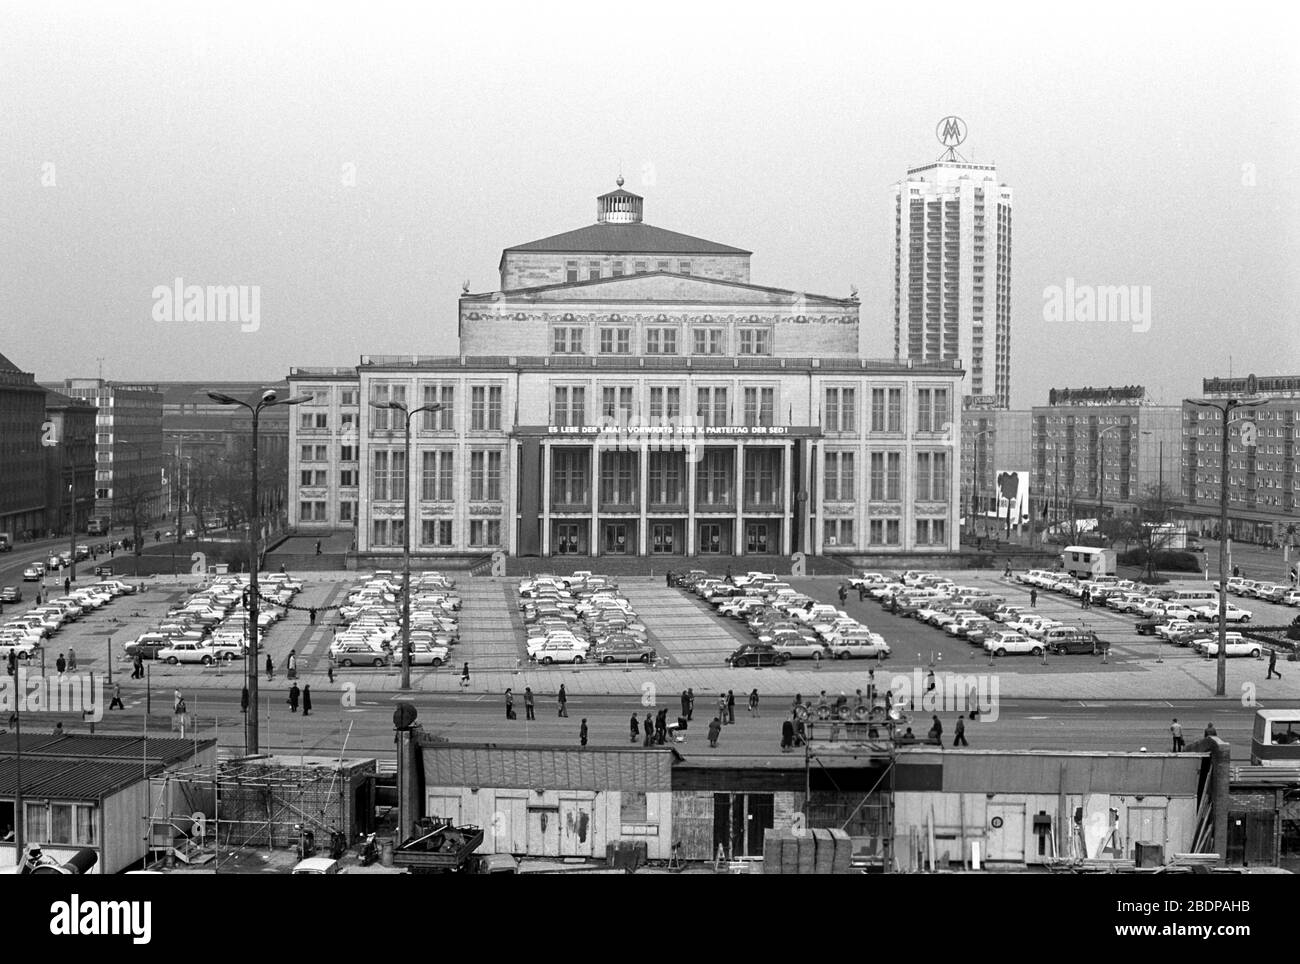 15 April 1980, Saxony, Leipzig: In front of the construction site 'Neues Gewandhaus Leipzig' the appearance of the Karl-Marx-Platz in April 1980 with its old and newly constructed buildings is visible. The picture shows the opera house with the banner 'Long live May 1 - Forward to X. Party Congress of the SED!' and the Wintergartenhochhaus with the double M as well as the Ringbauung. Exact date of recording not known. Photo: Volkmar Heinz/dpa-Zentralbild/ZB Stock Photo